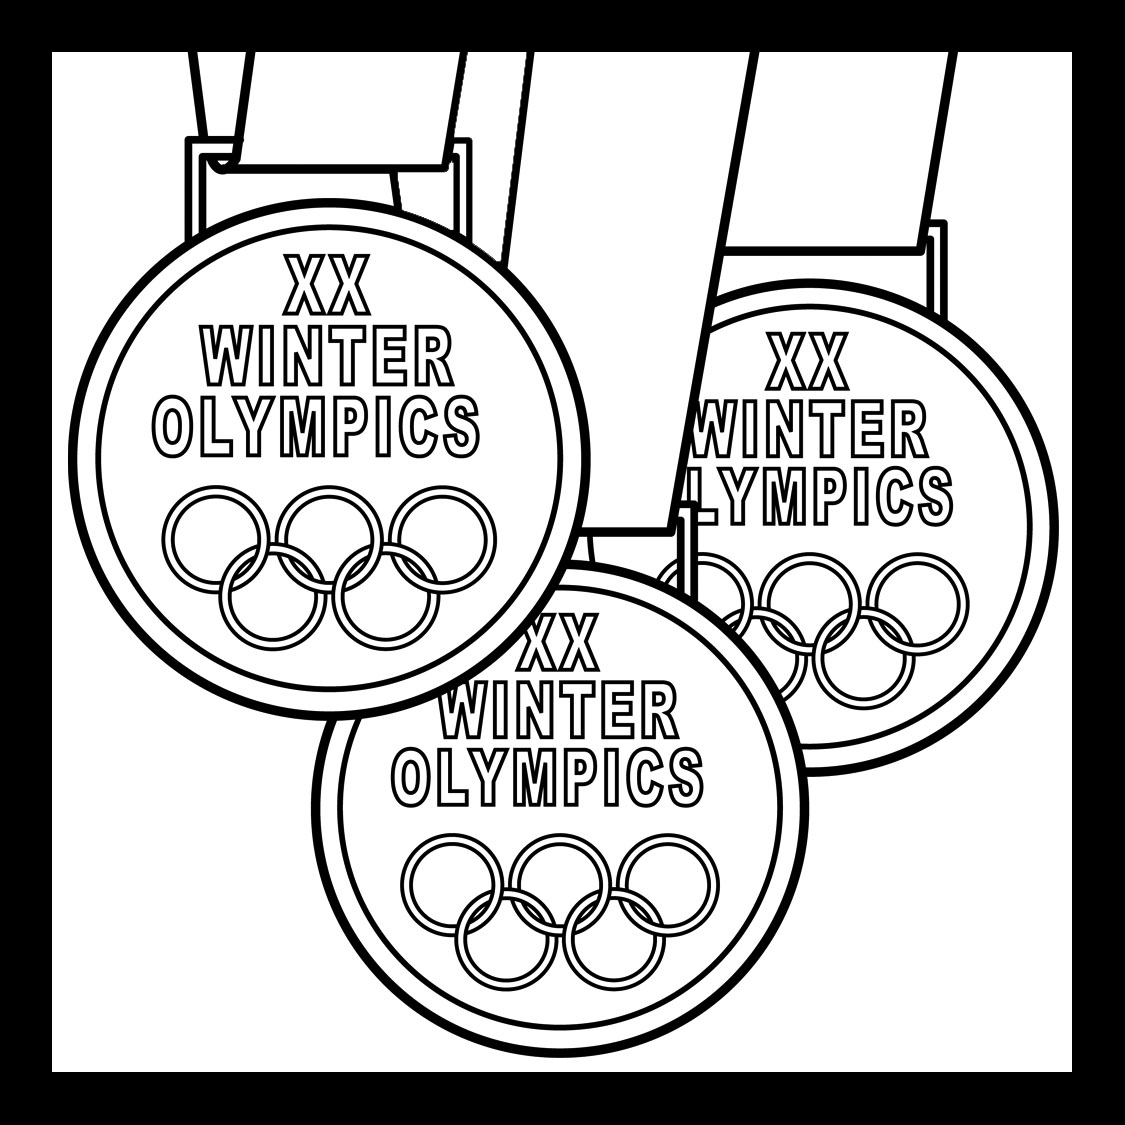 Olympic Medal Drawing at GetDrawings.com | Free for personal use